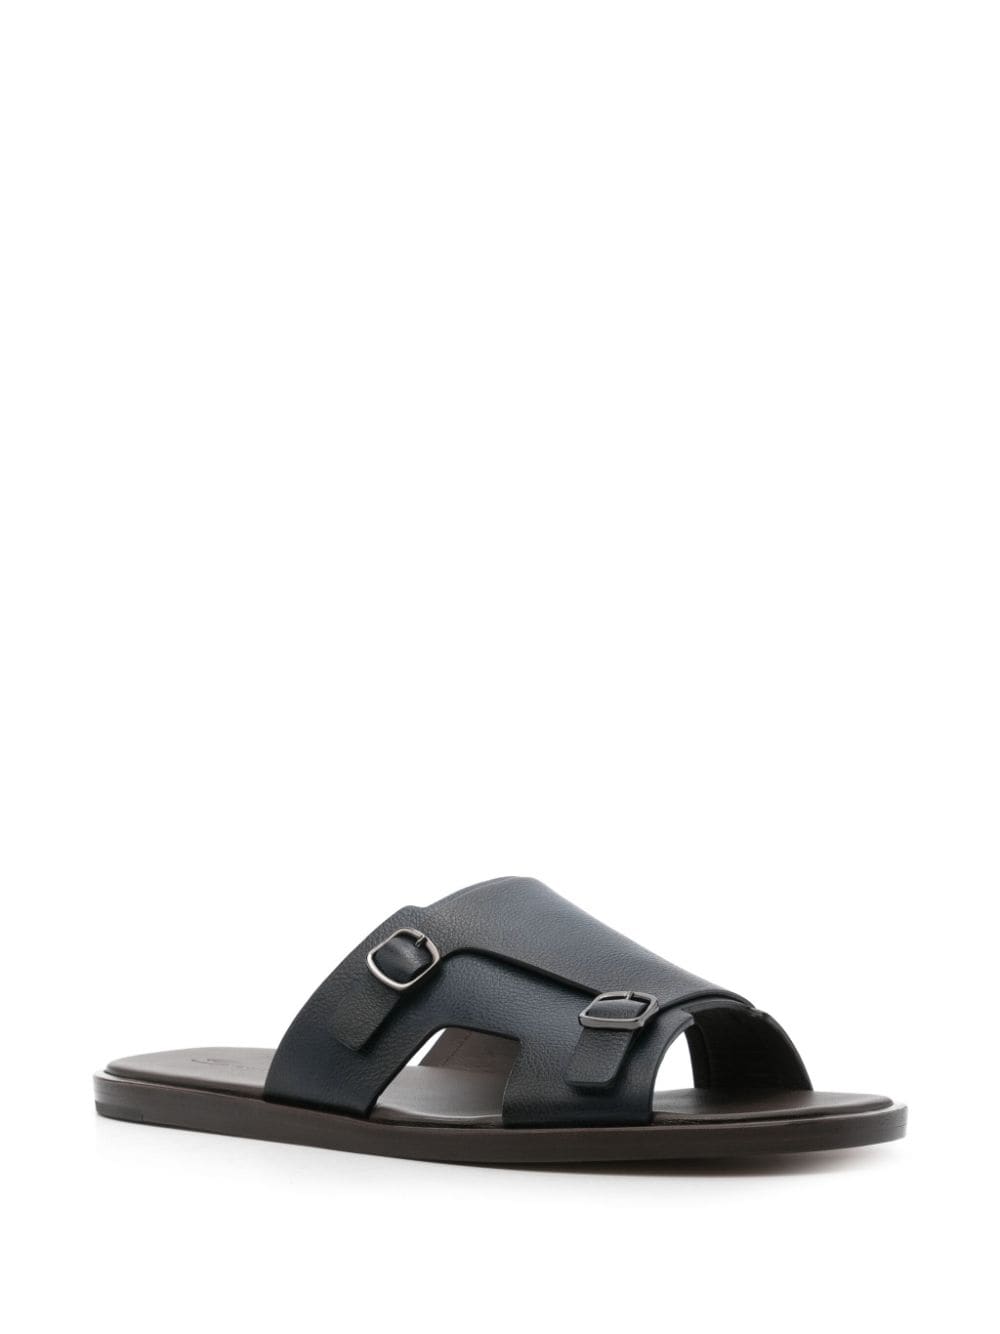 DOUBLE-BUCKLE LEATHER SANDALS